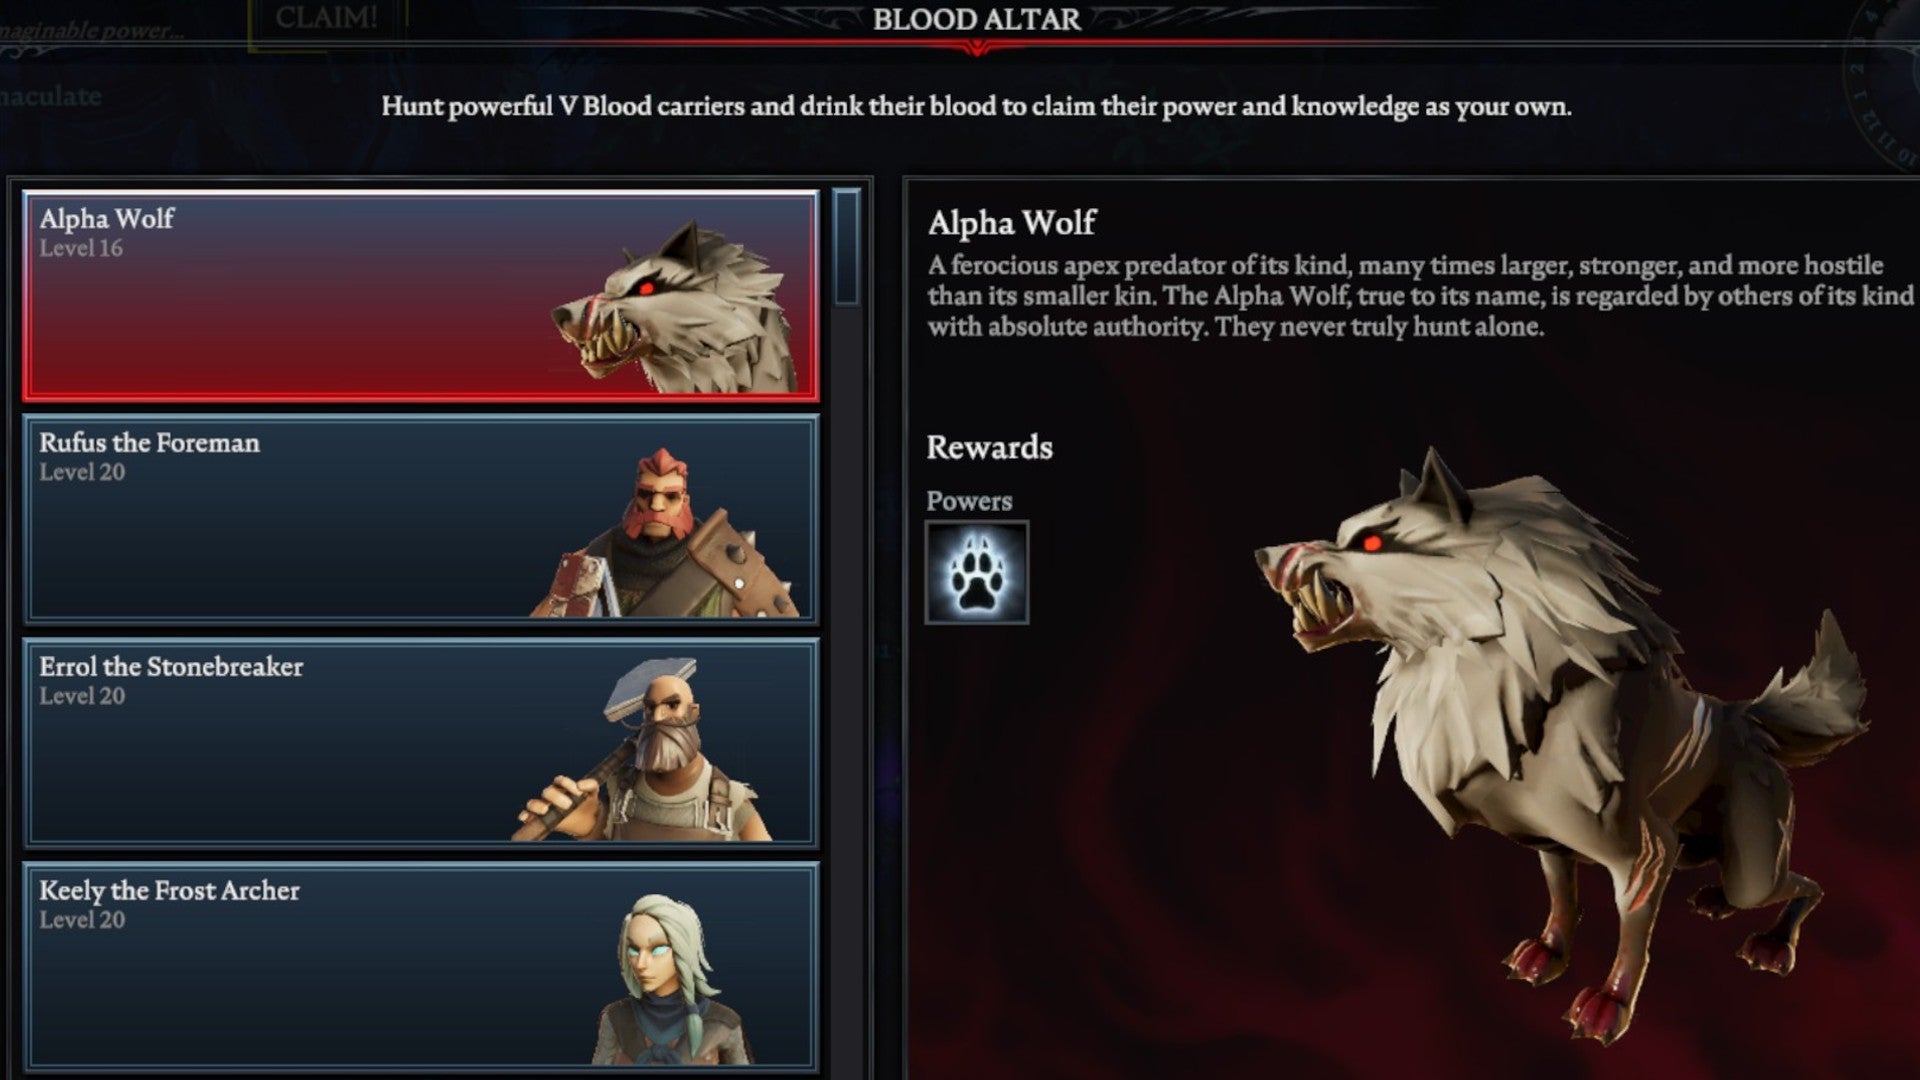 V Rising Alpha Wolf Blood Altar track page, showing an image of the snarling alpha wolf on the right and a list of bosses on the left